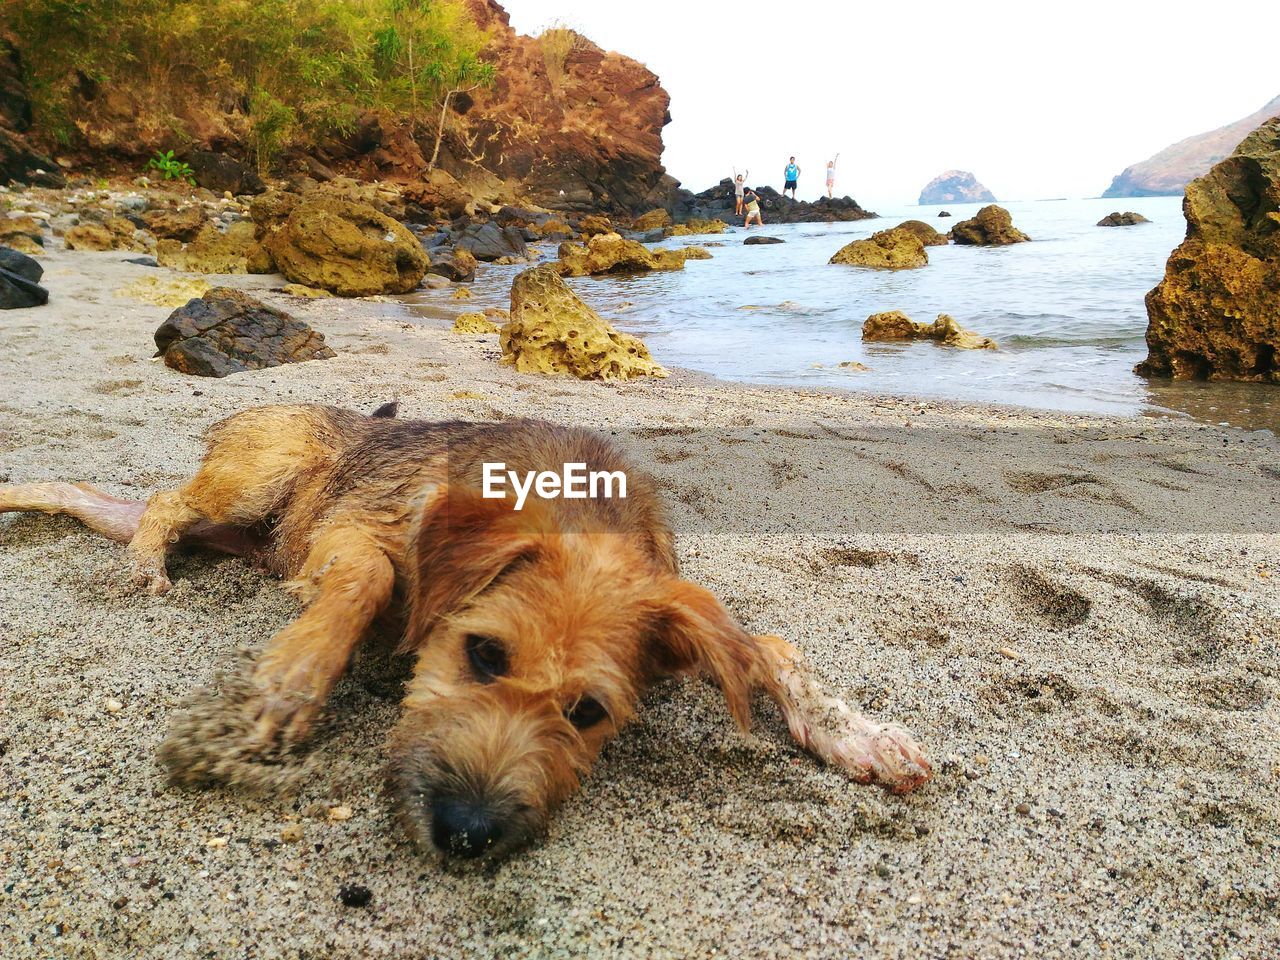 Dog relaxing at beach